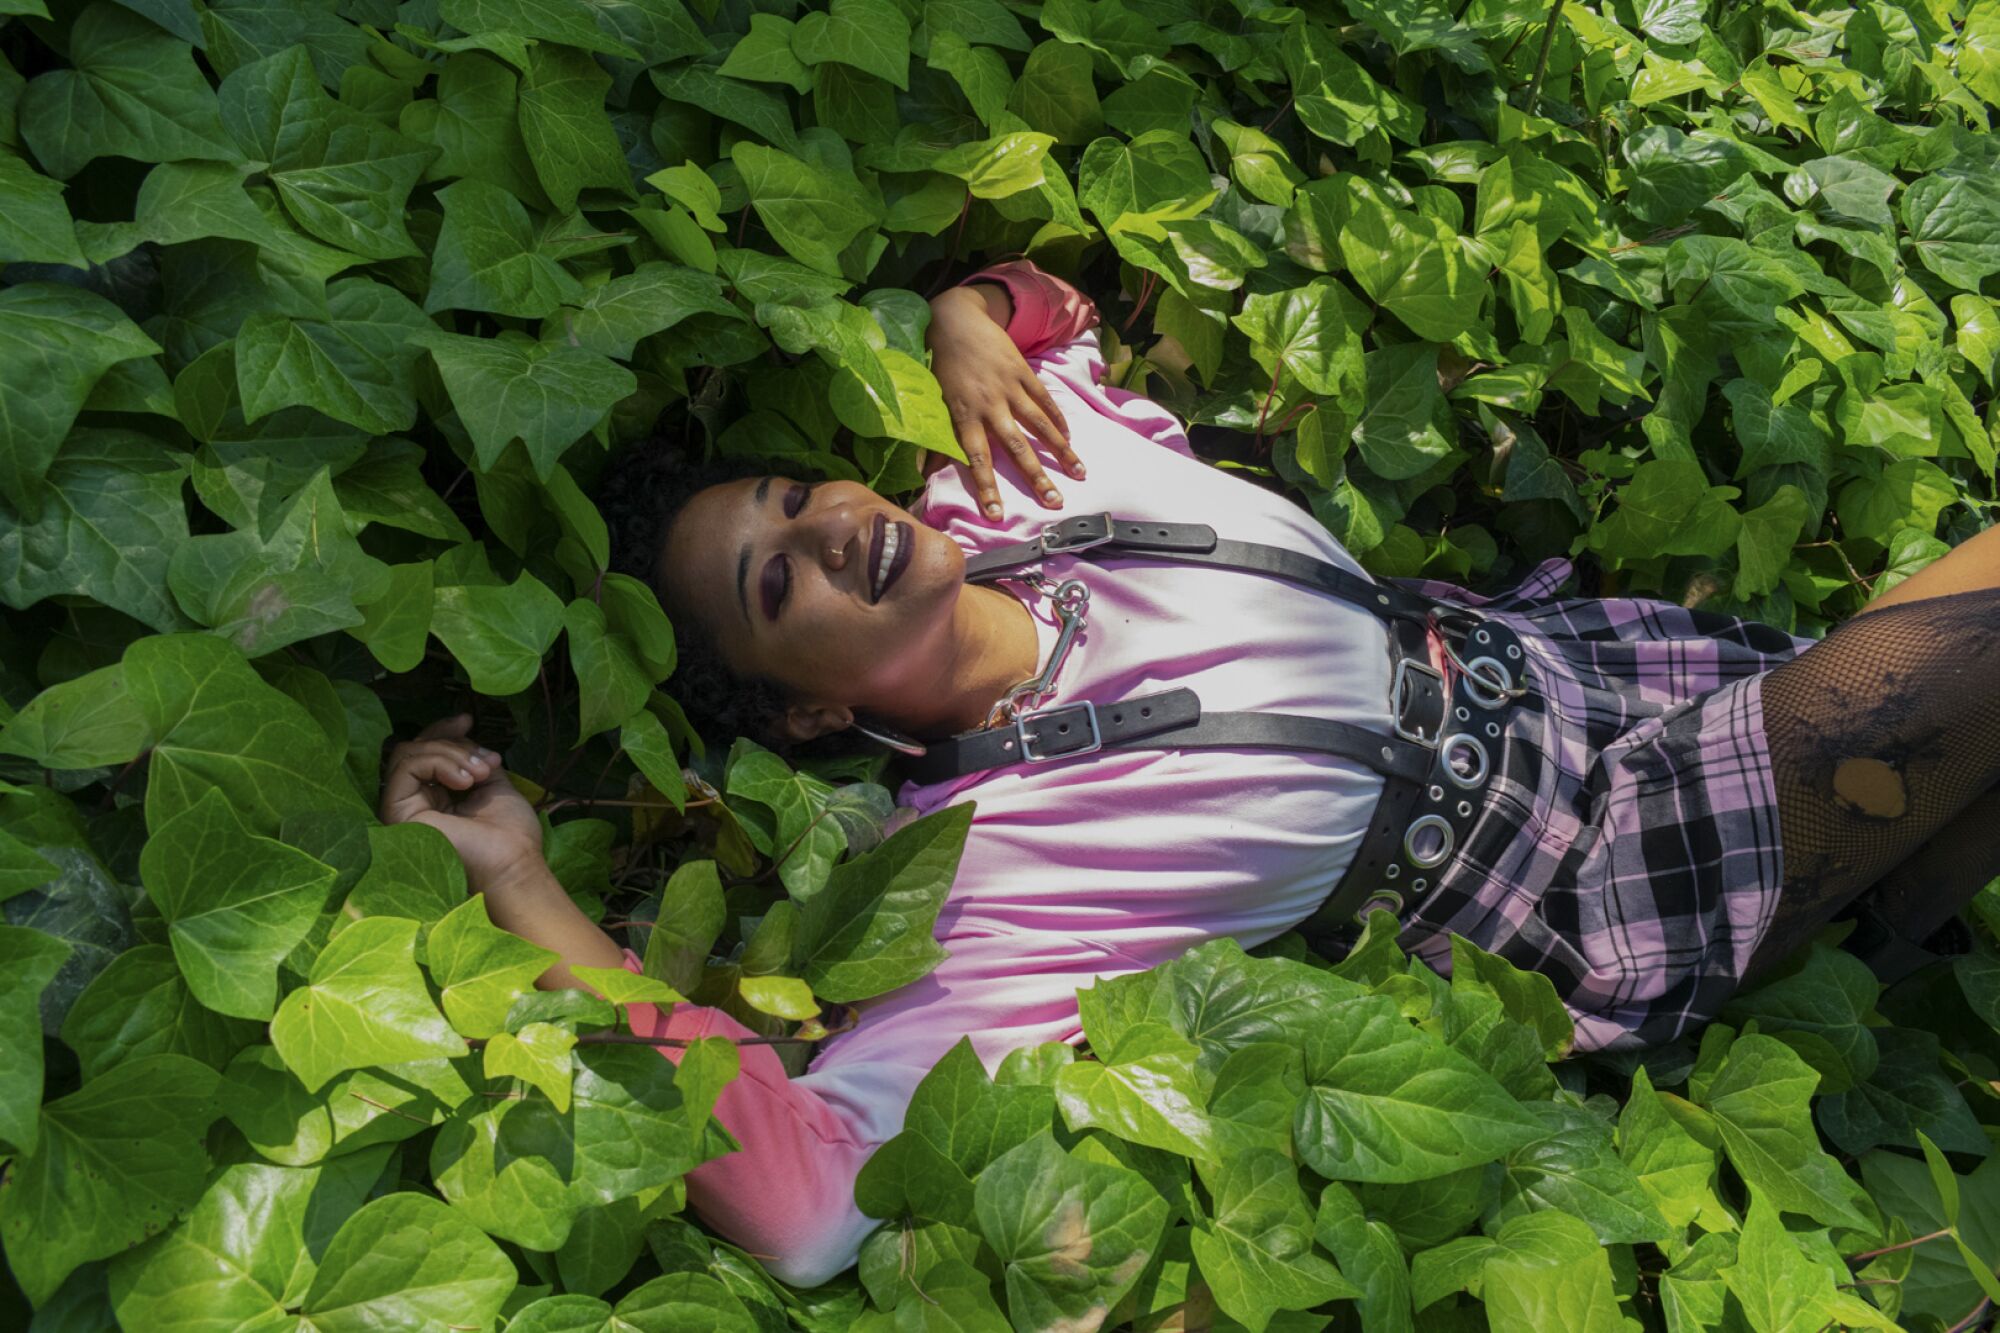 A photograph of a woman lying in a bed of groundcover plants